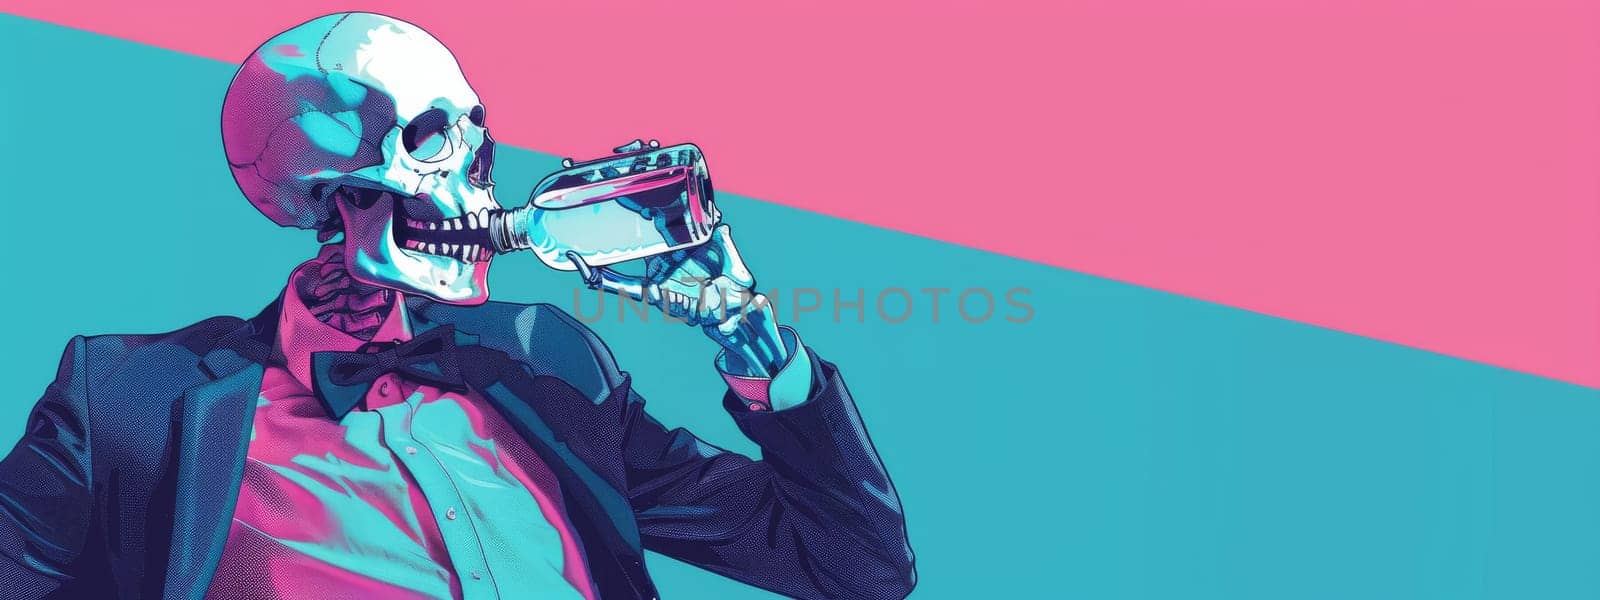 Skeleton in a suit drinking hard liquor from the flask on the bright blue and pink background